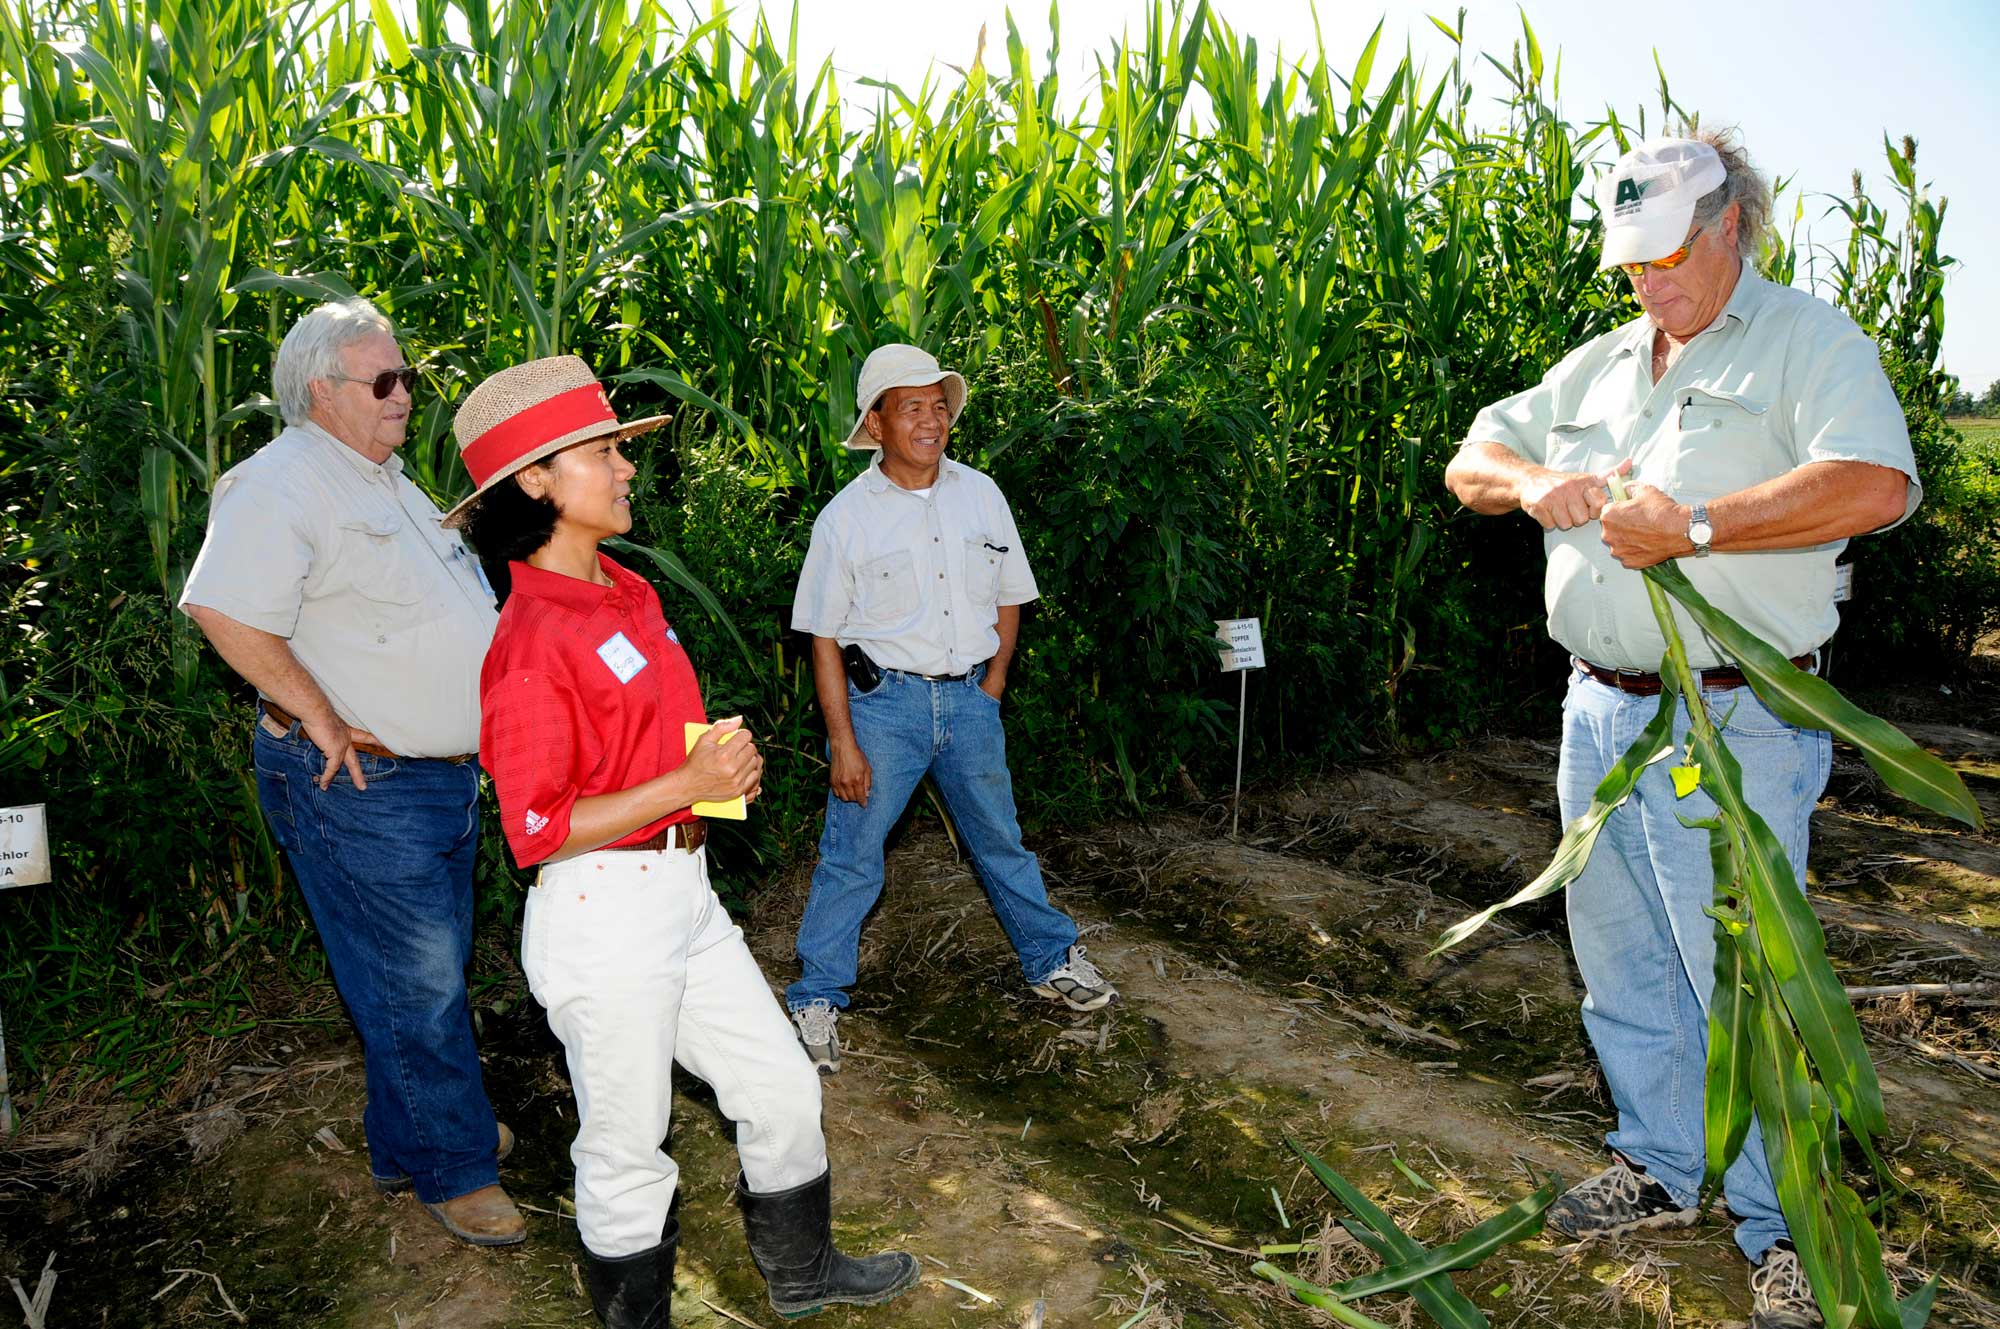 Photograph of four people standing in front of a field of sweet sorghum. Three of the people watch as the forth person cuts a piece of sorghum stem.